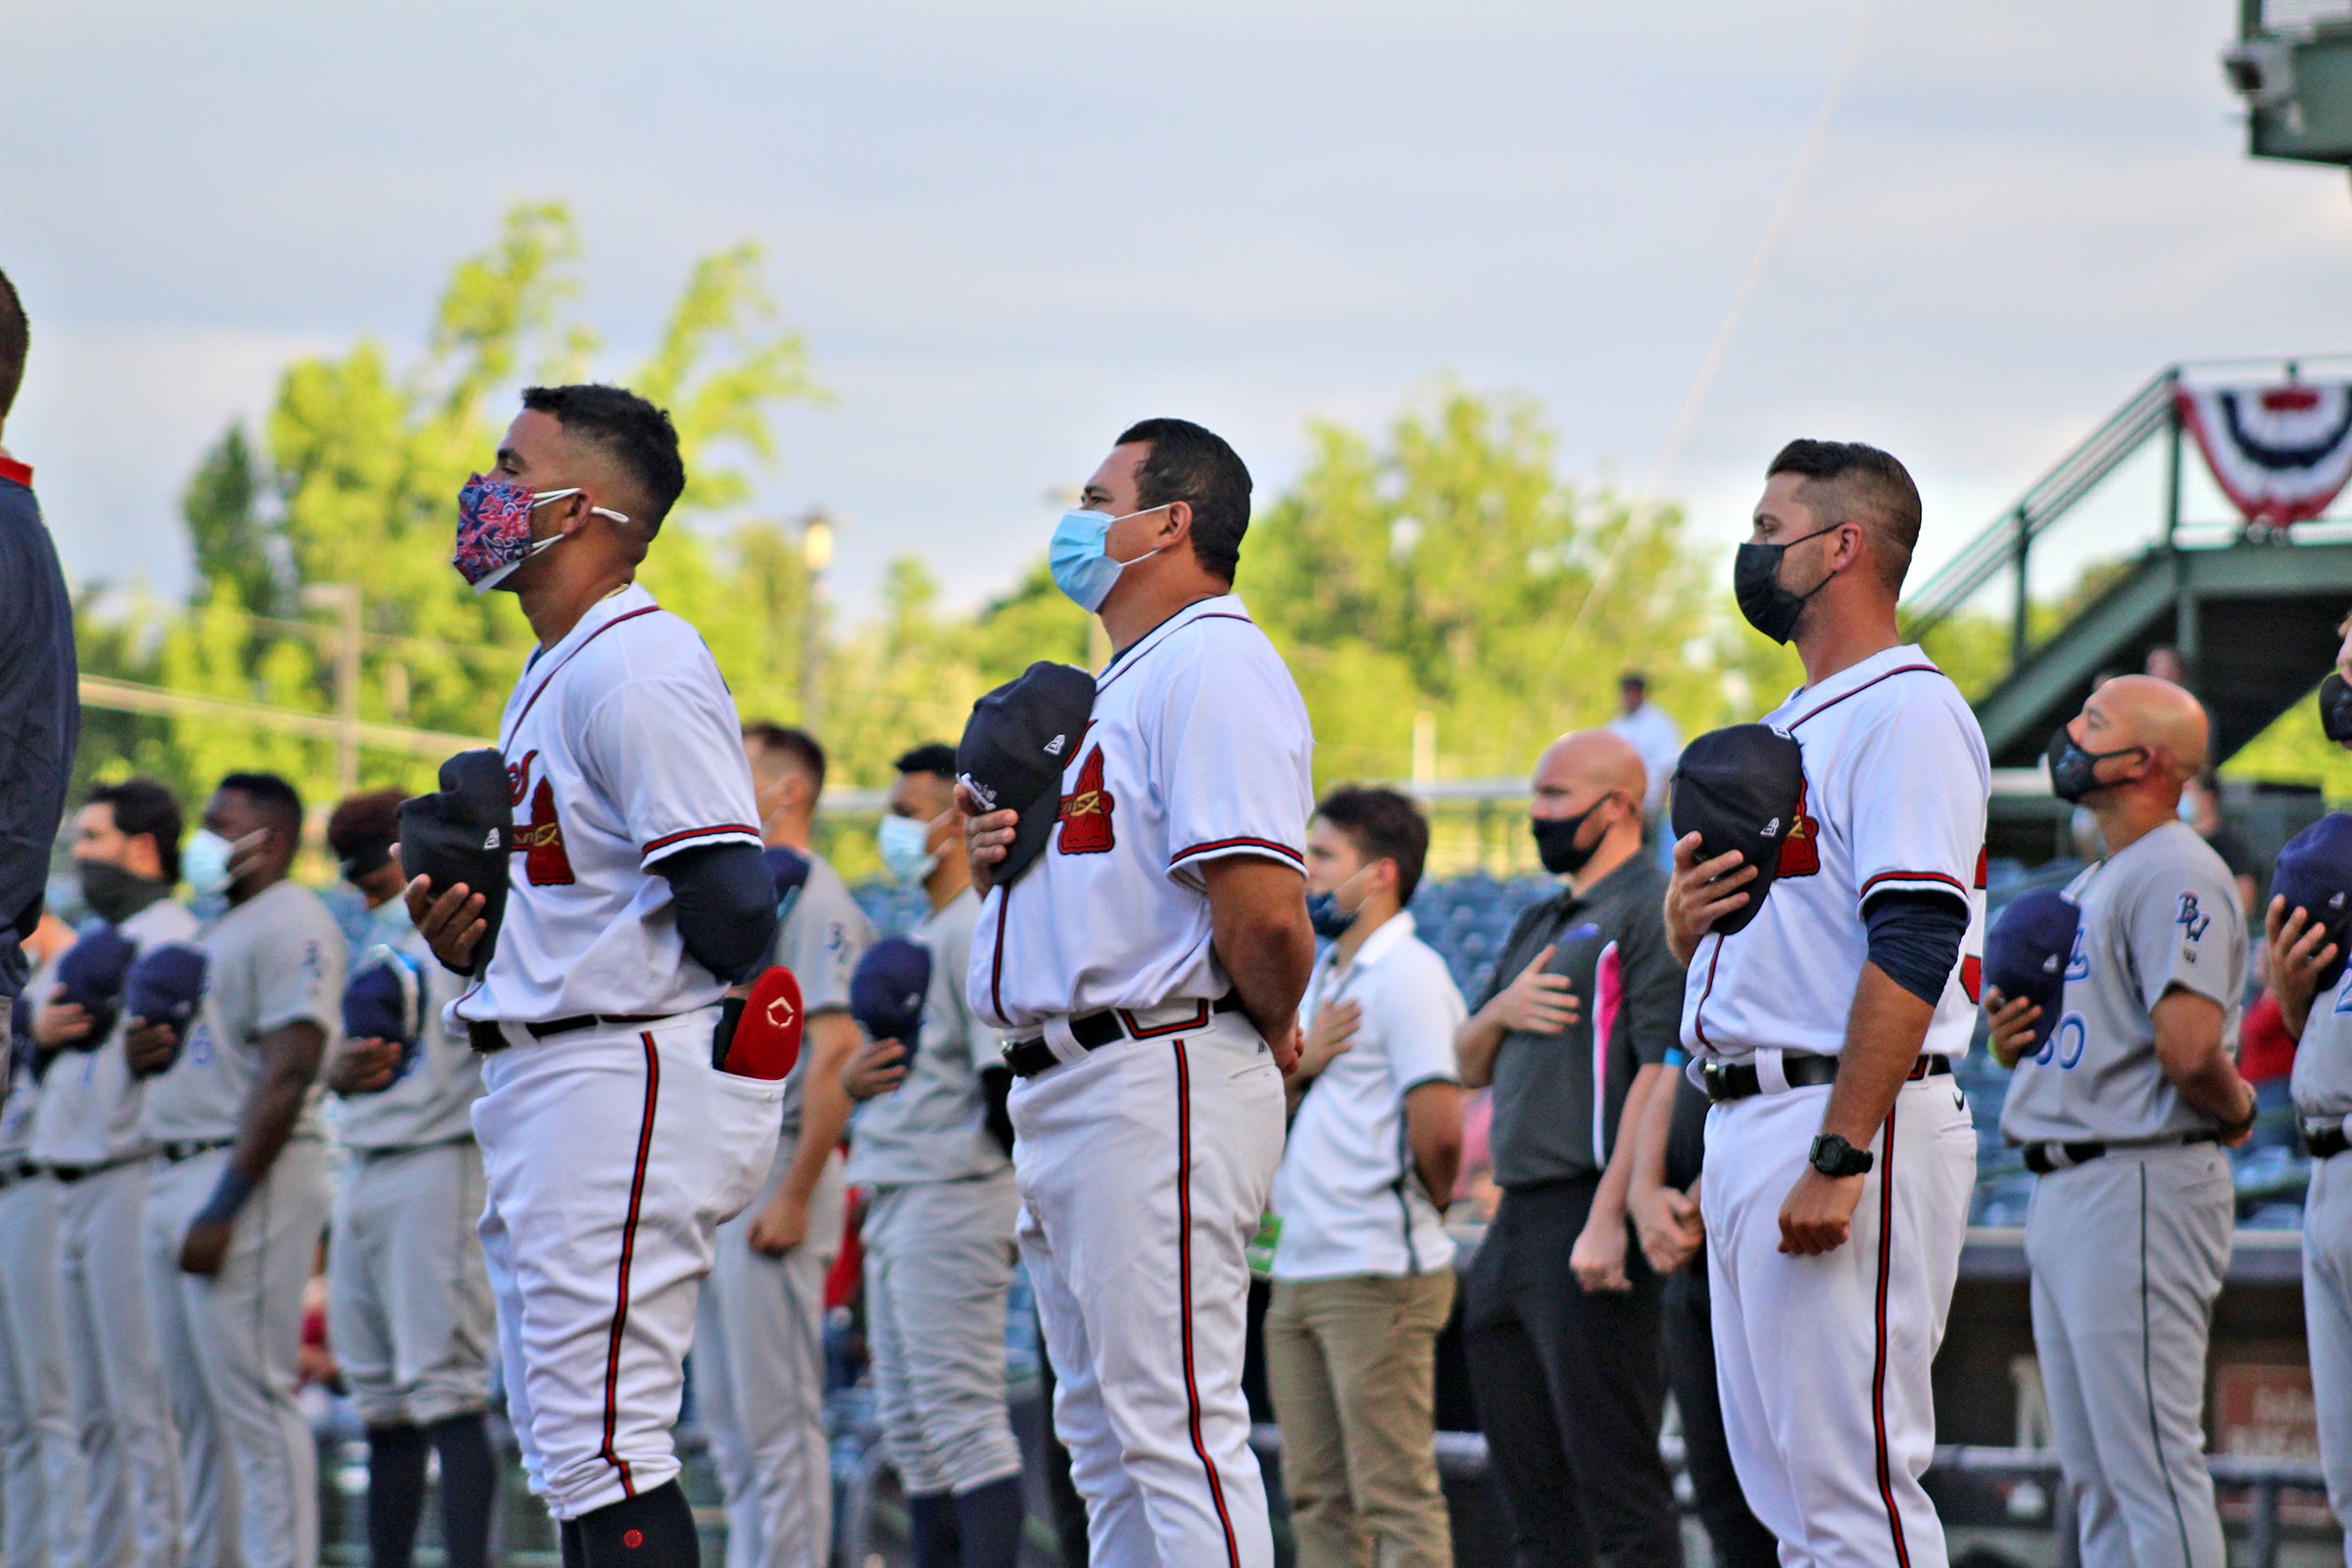 M-Braves return to the field after 612 days away - The Vicksburg